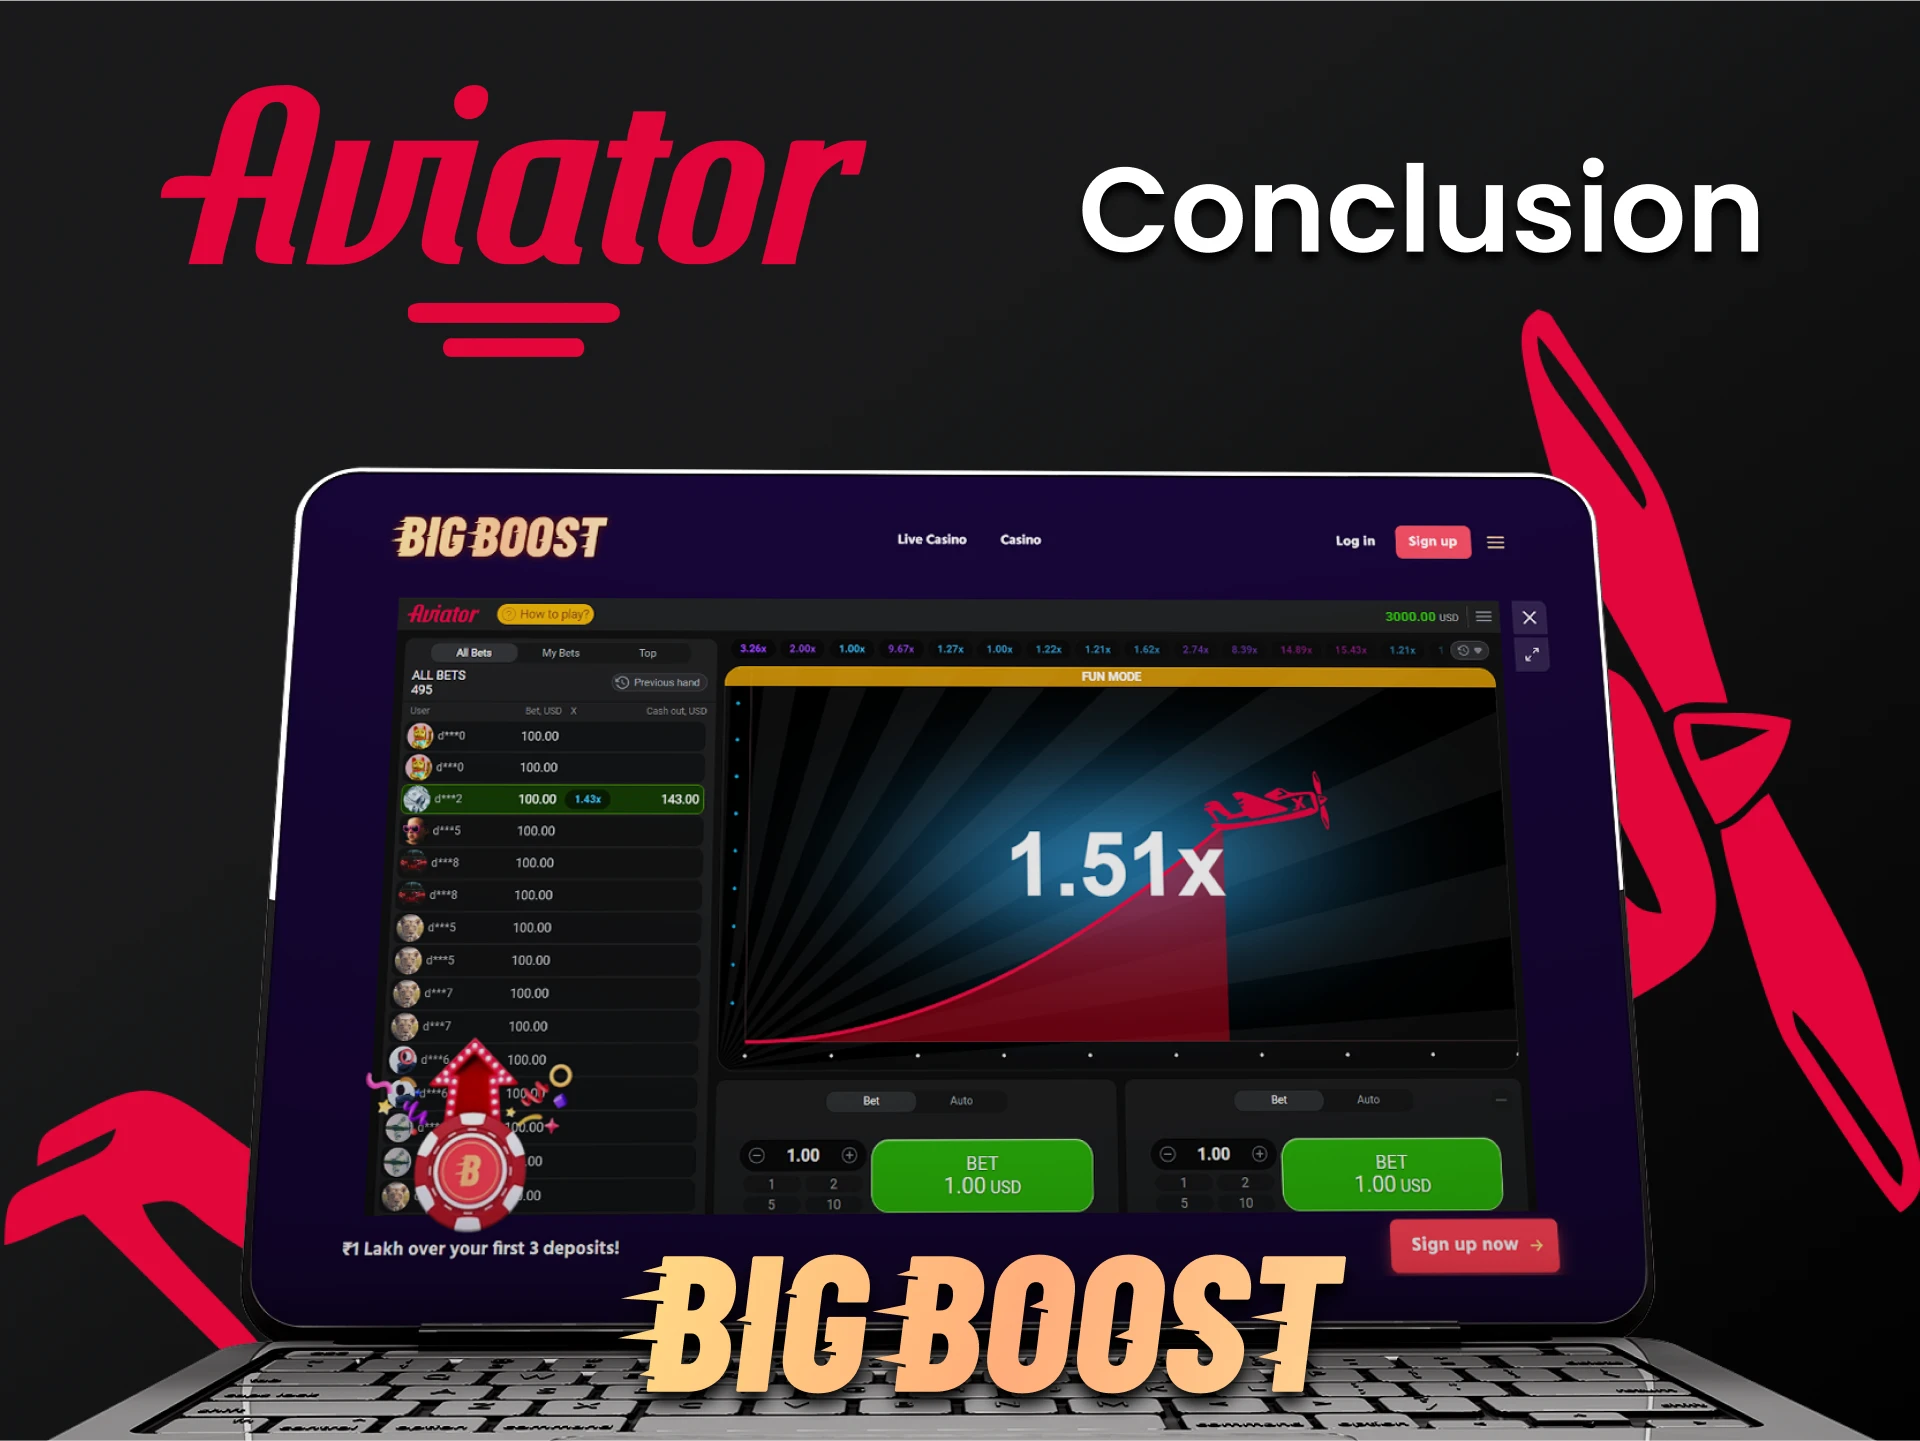 Big Boost is the best choice for playing Aviator.